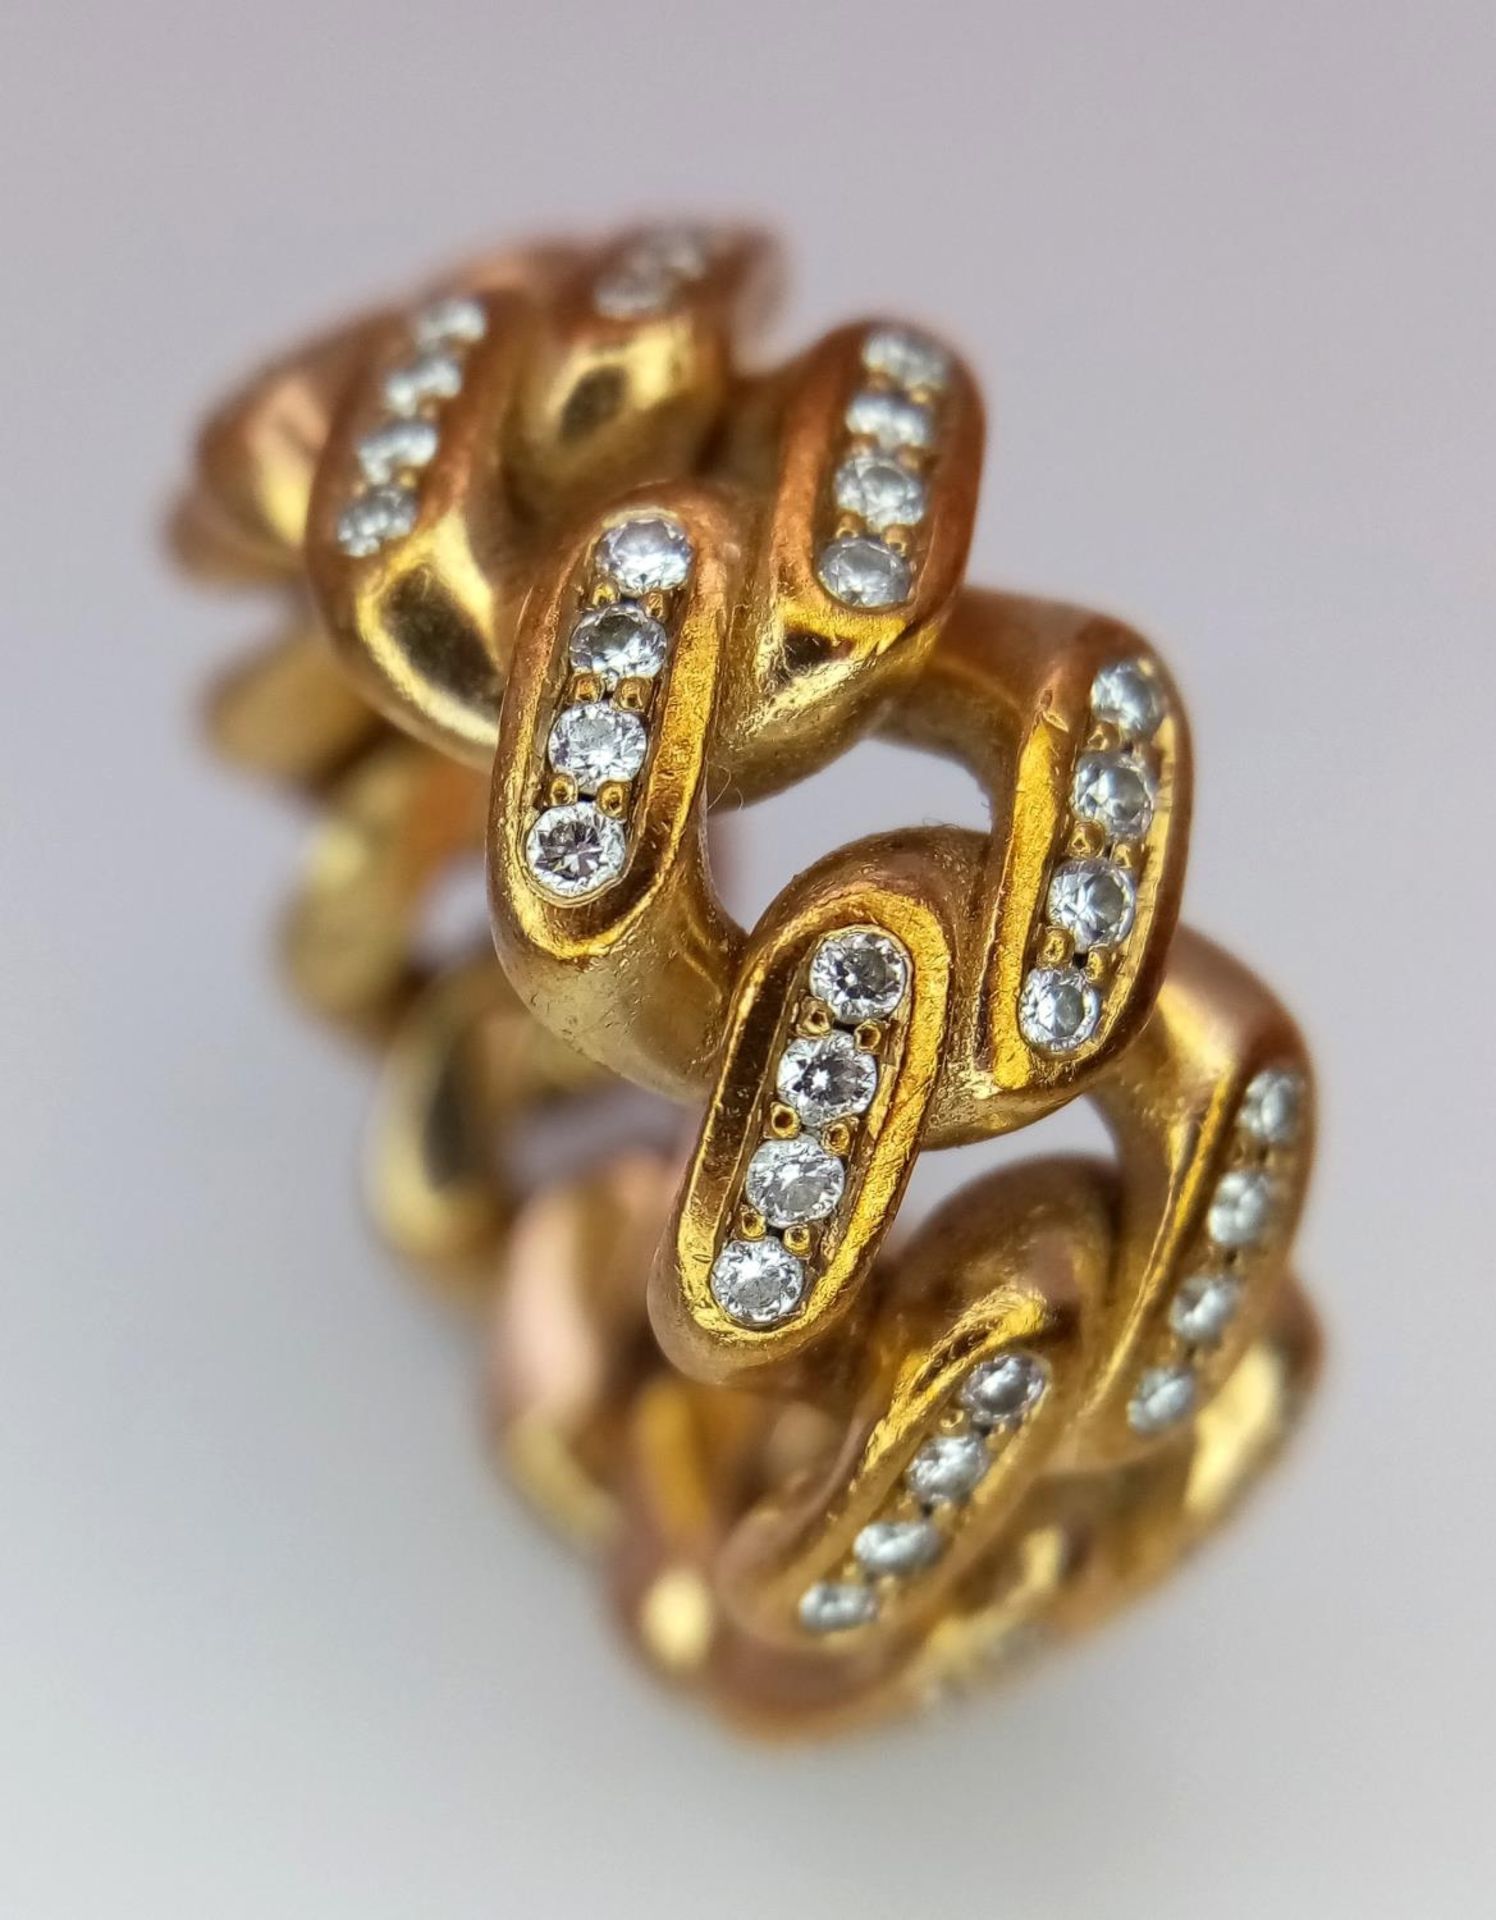 A 9K YELLOW GOLD DIAMOND SET LINK RING 1CT APPROX 12.1G SIZE N. SC 9095 - Image 2 of 5